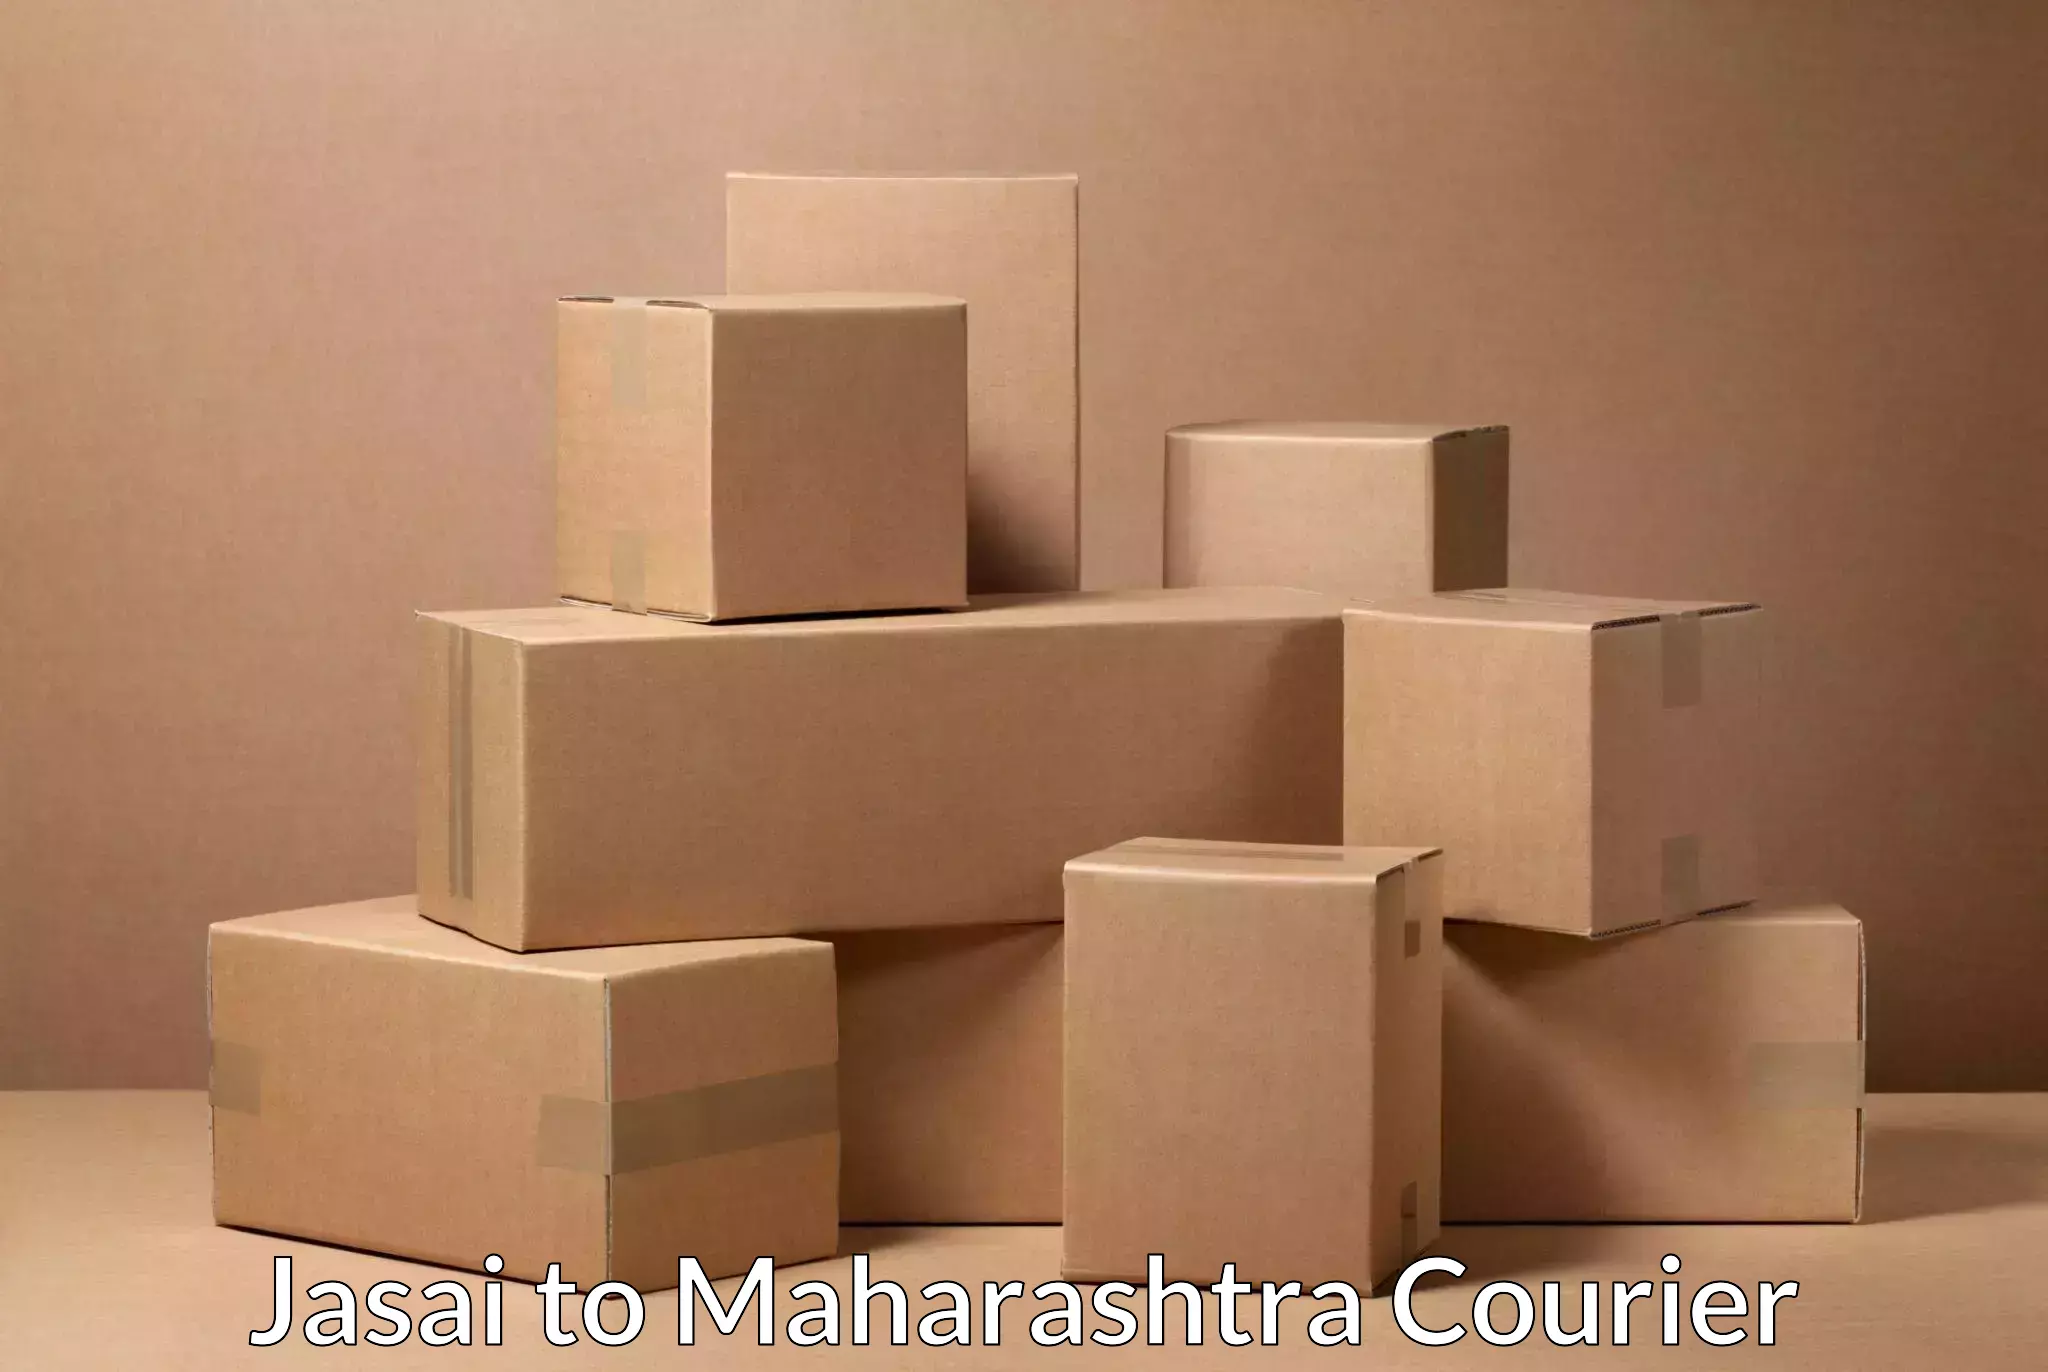 State-of-the-art courier technology in Jasai to Maharashtra